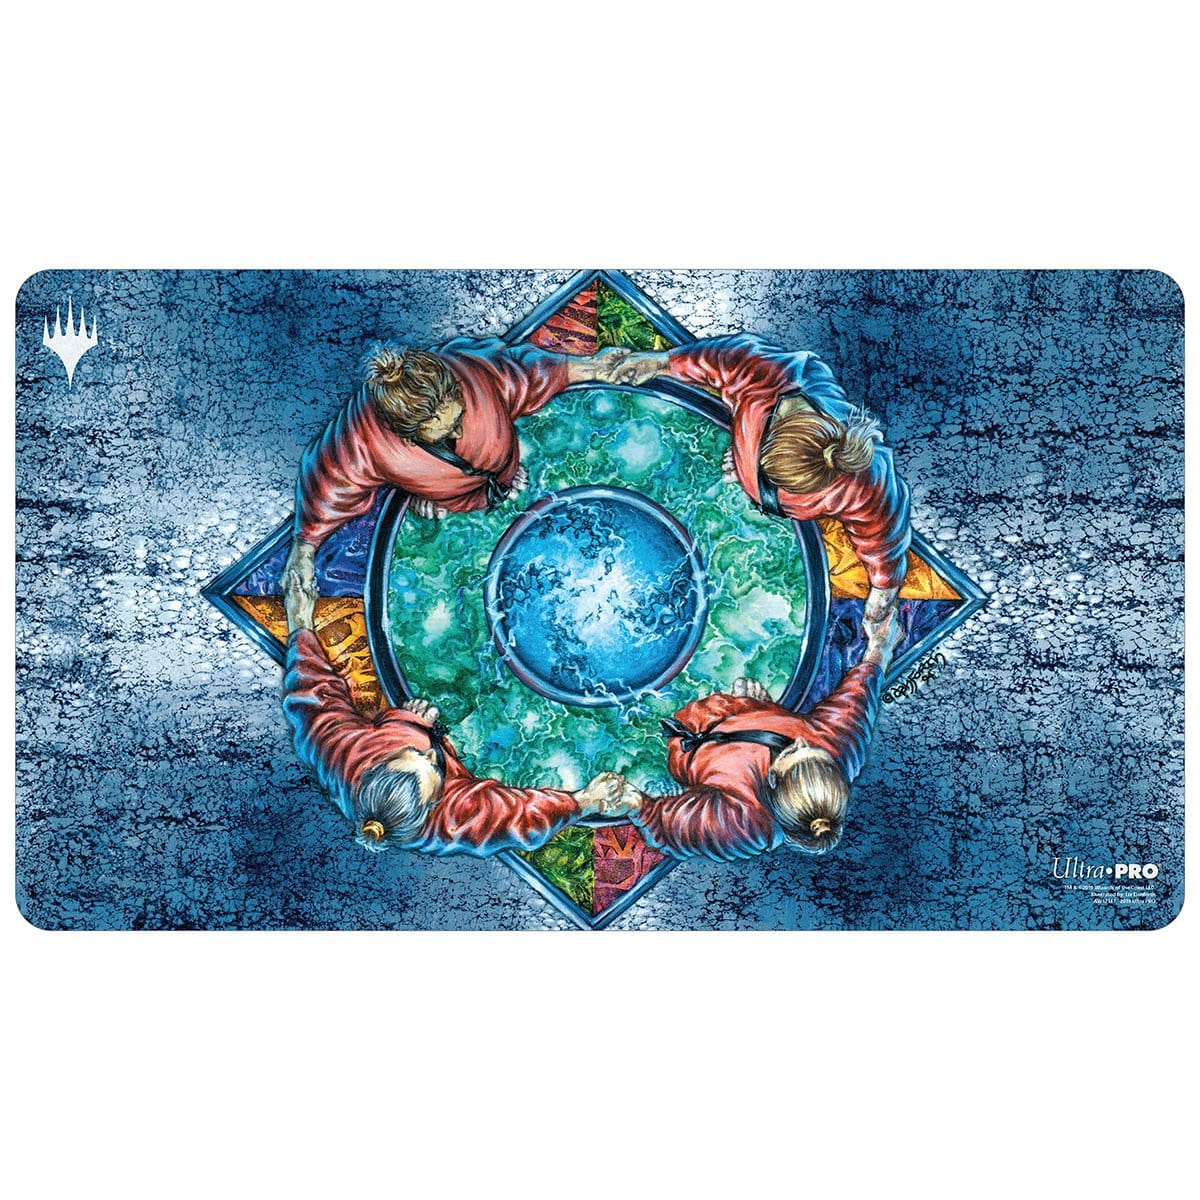 Hymn to Tourach Playmat - Playmat - Original Magic Art - Accessories for Magic the Gathering and other card games